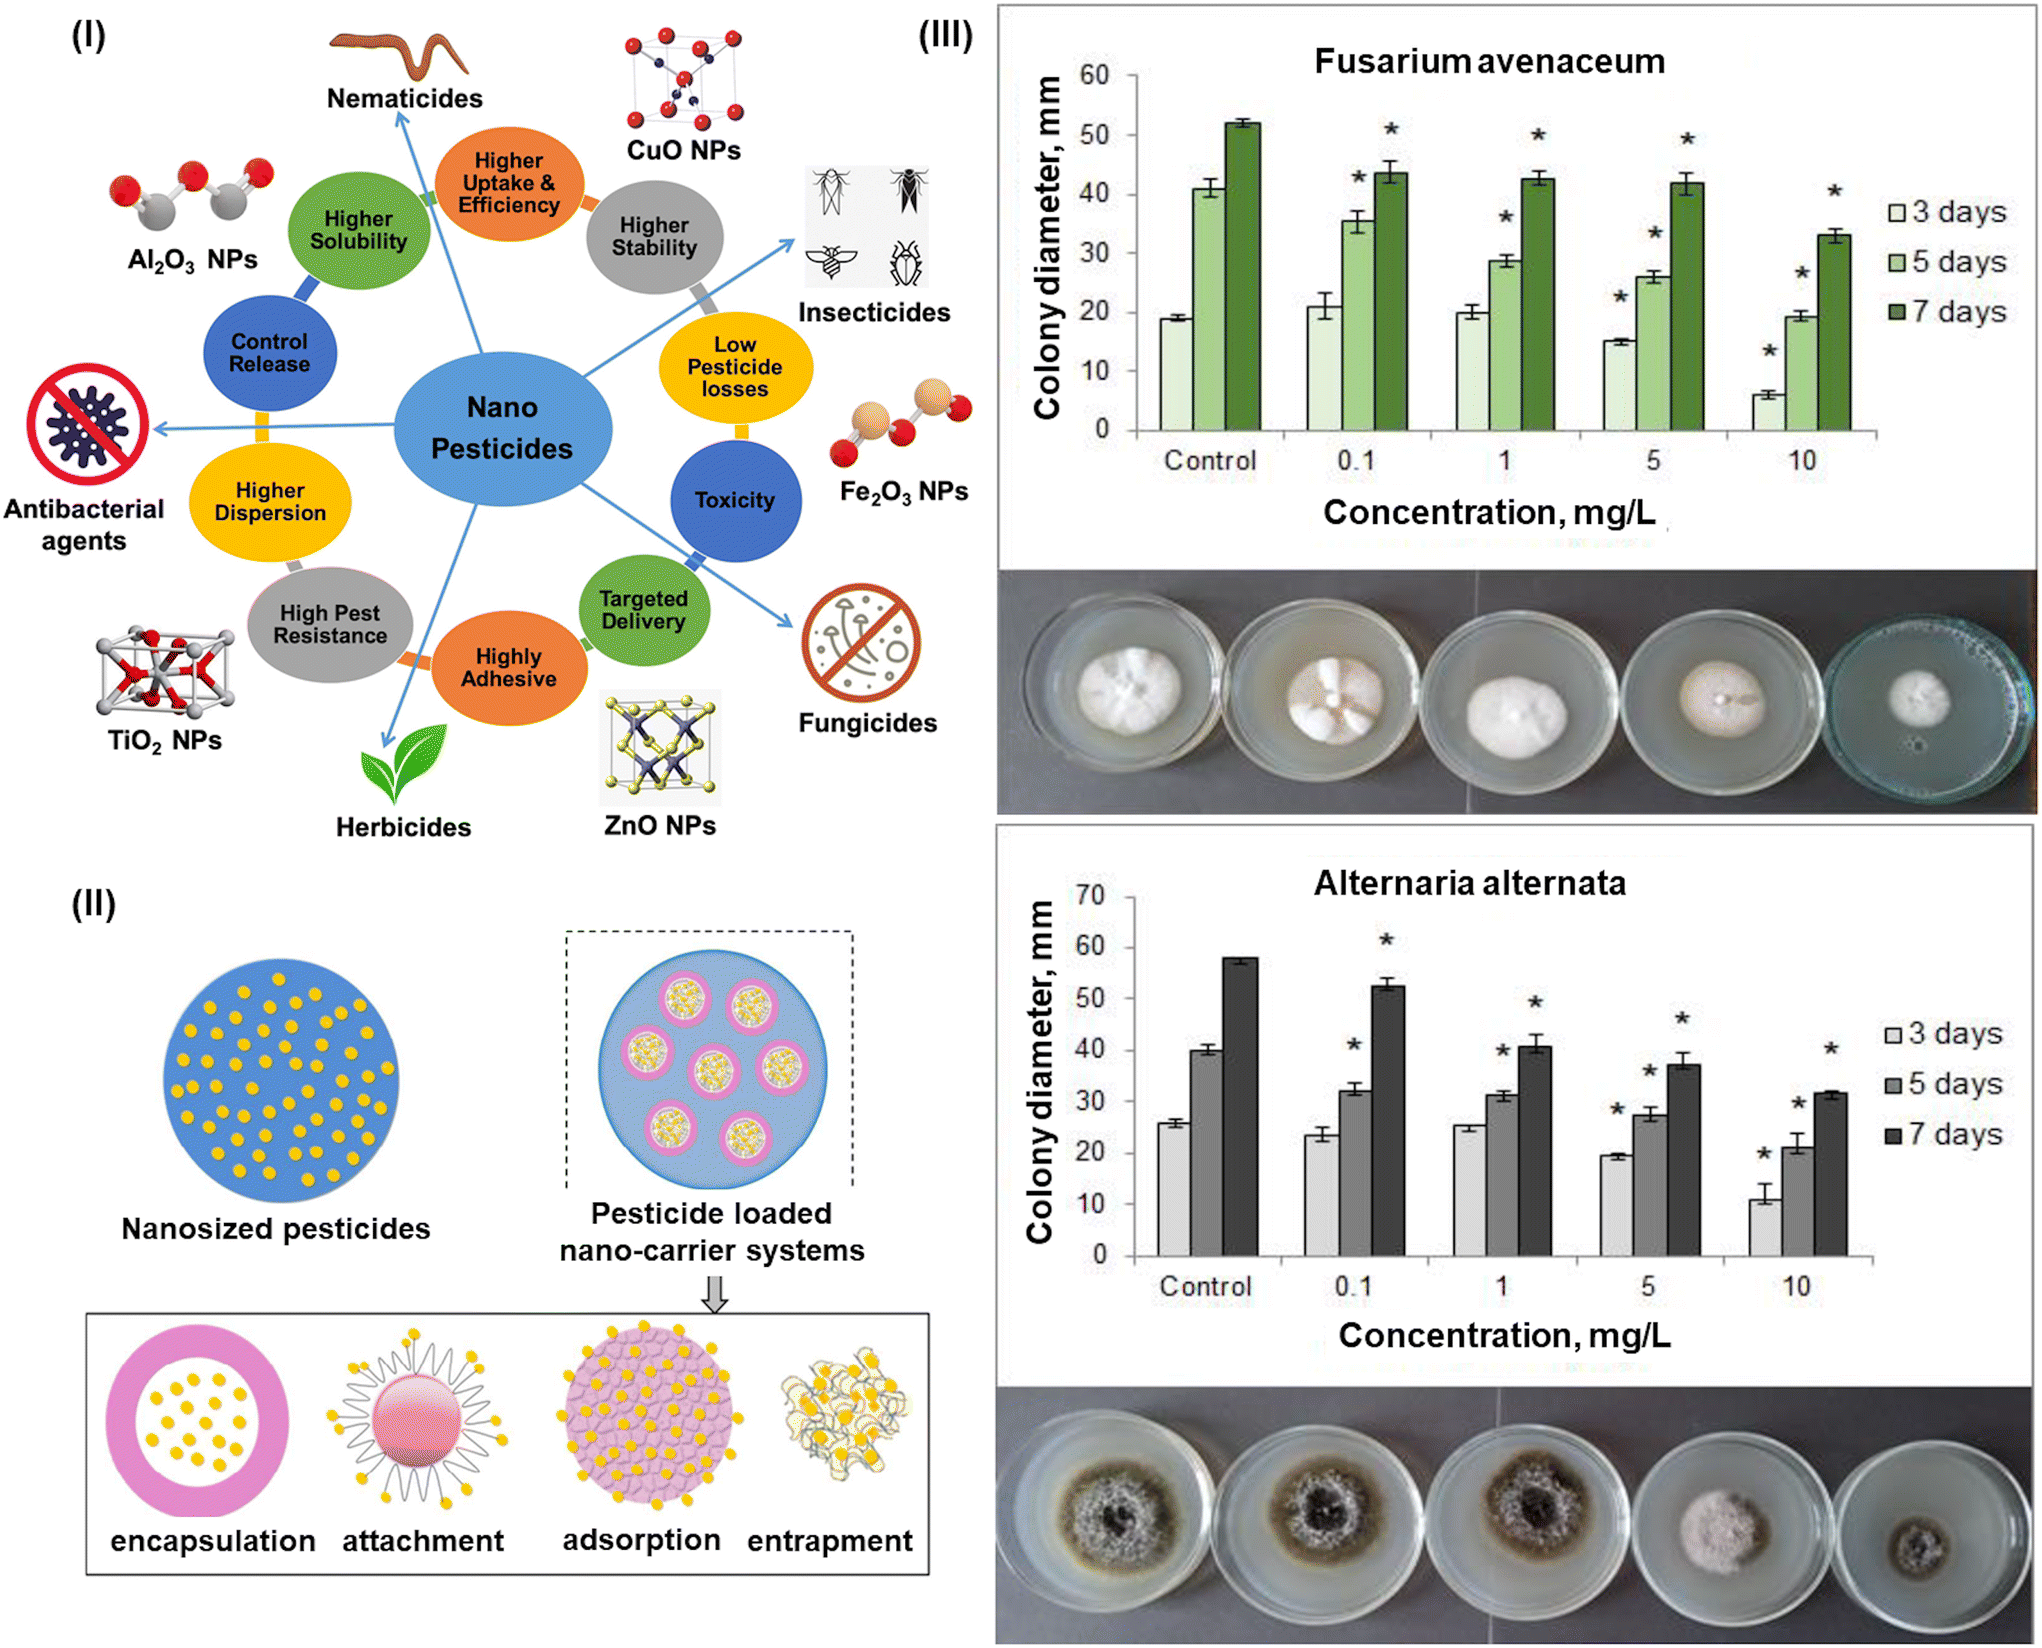 Biosynthesized metal oxide nanoparticles for sustainable agriculture:  next-generation nanotechnology for crop production, protection and  management - Nanoscale (RSC Publishing) DOI:10.1039/D2NR03944C